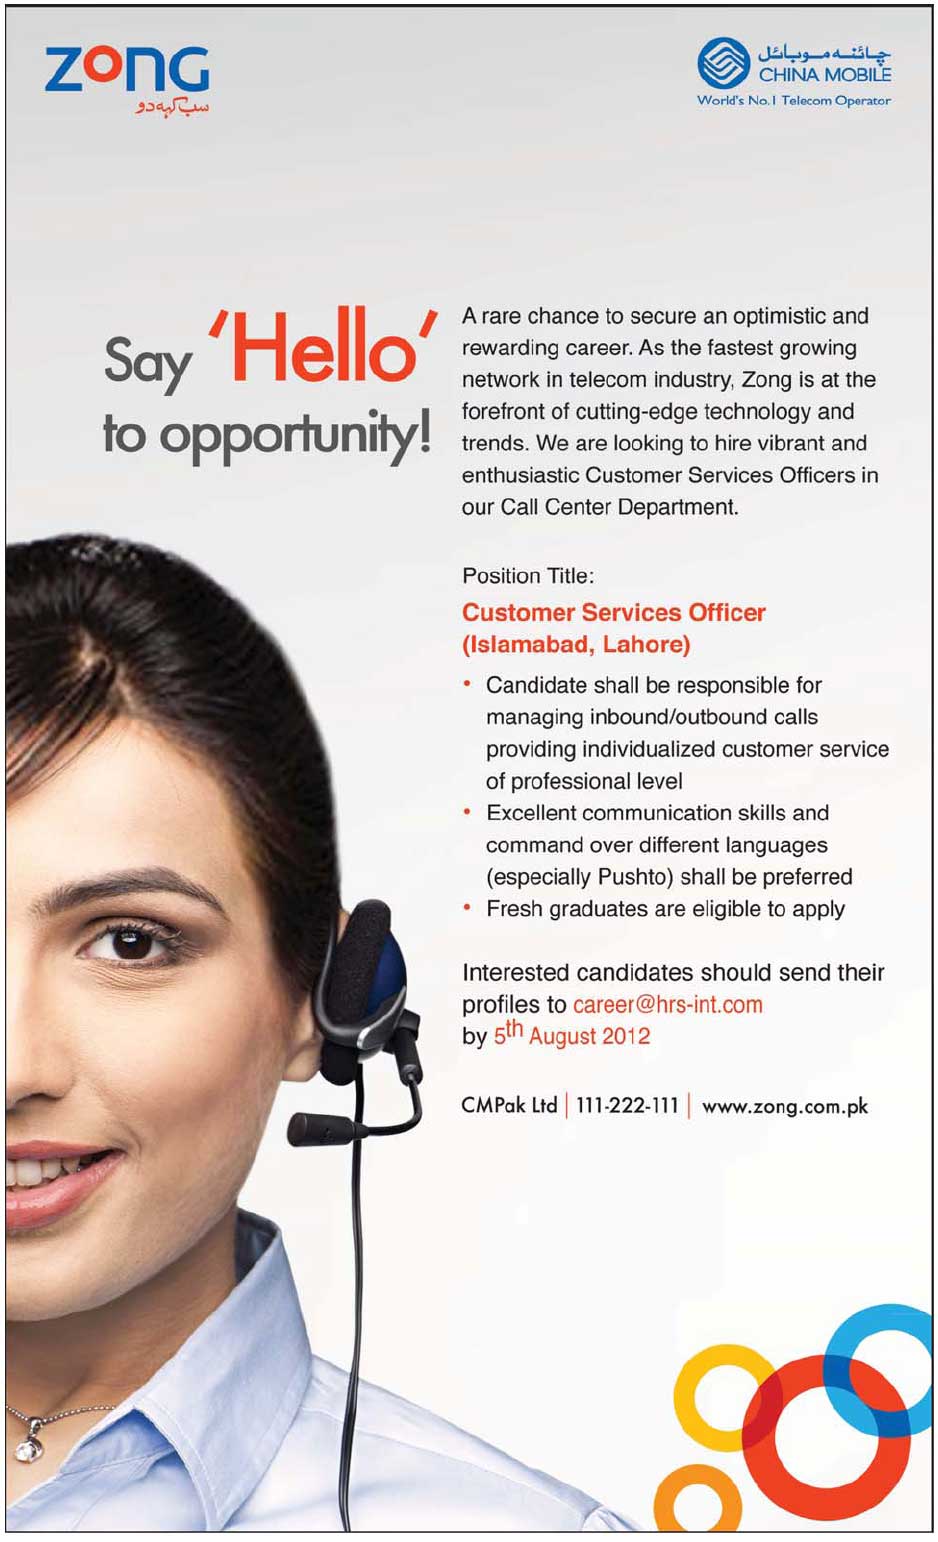 Customer Services Officer Required for ZONG Call Center Department